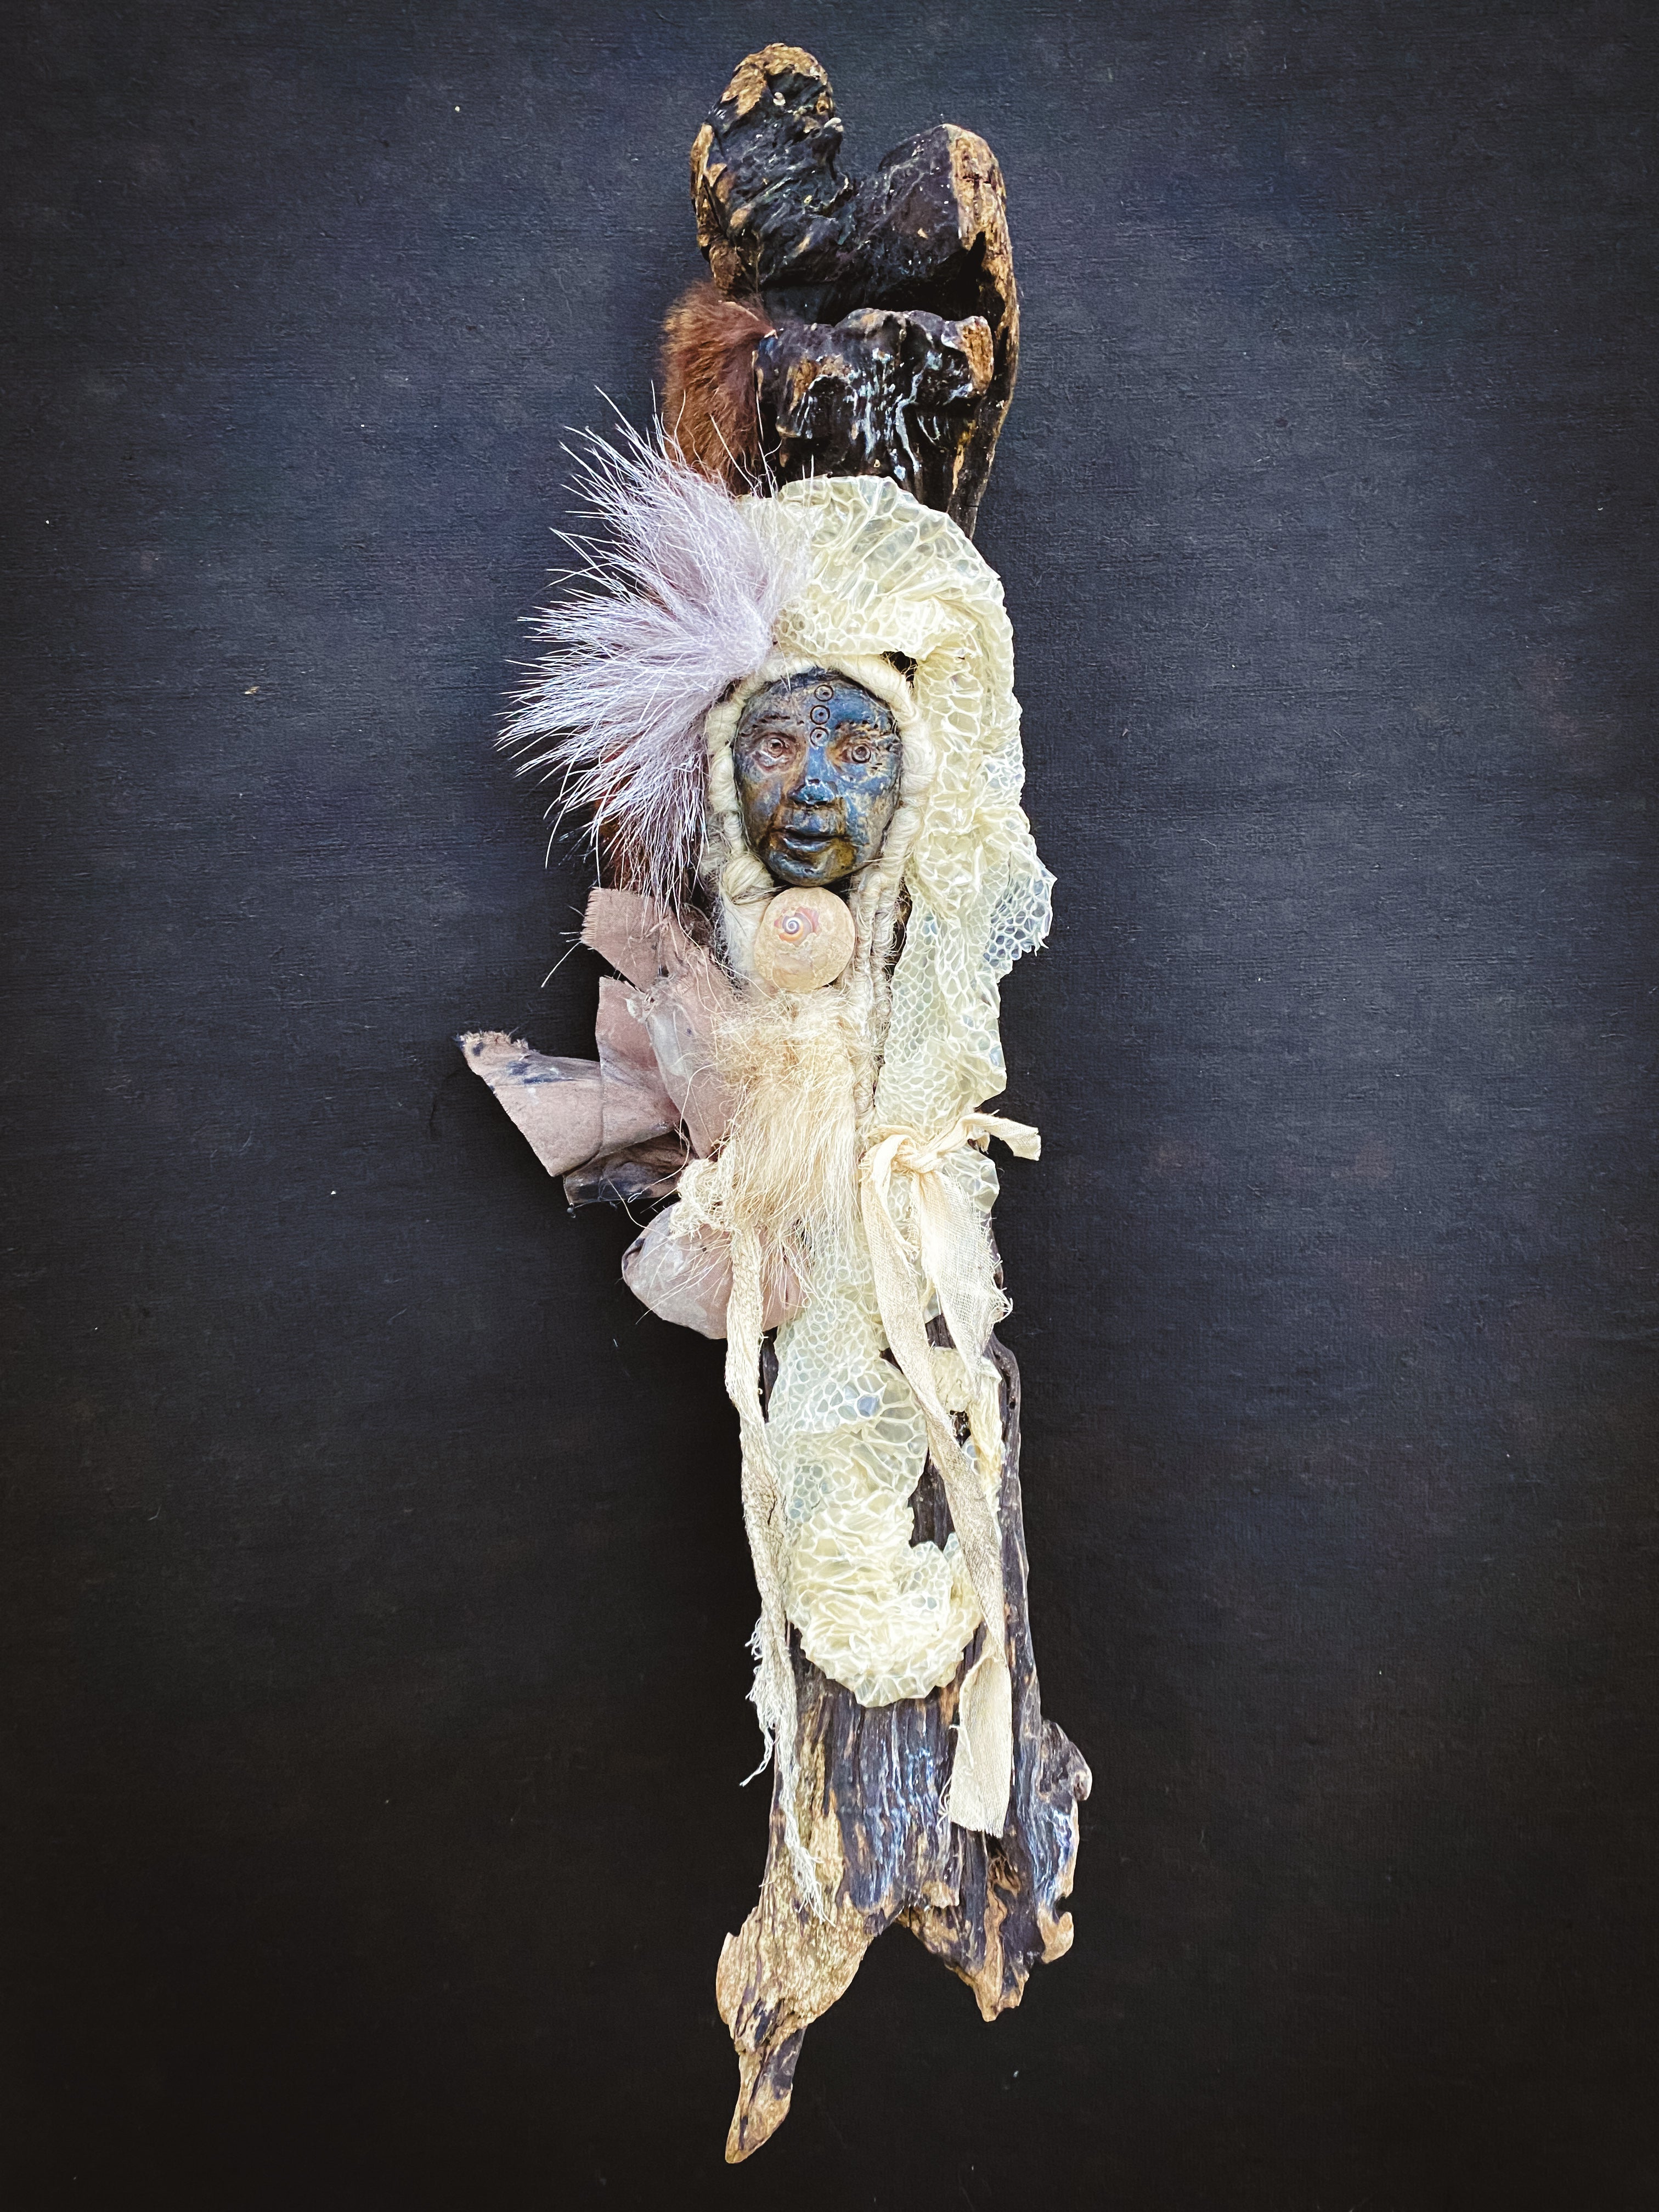 Nature Spirit Doll for Mystic Visions, Astral Journeys, Psychic Abilities + Clarity - Medicine Doll - JuJu Doll